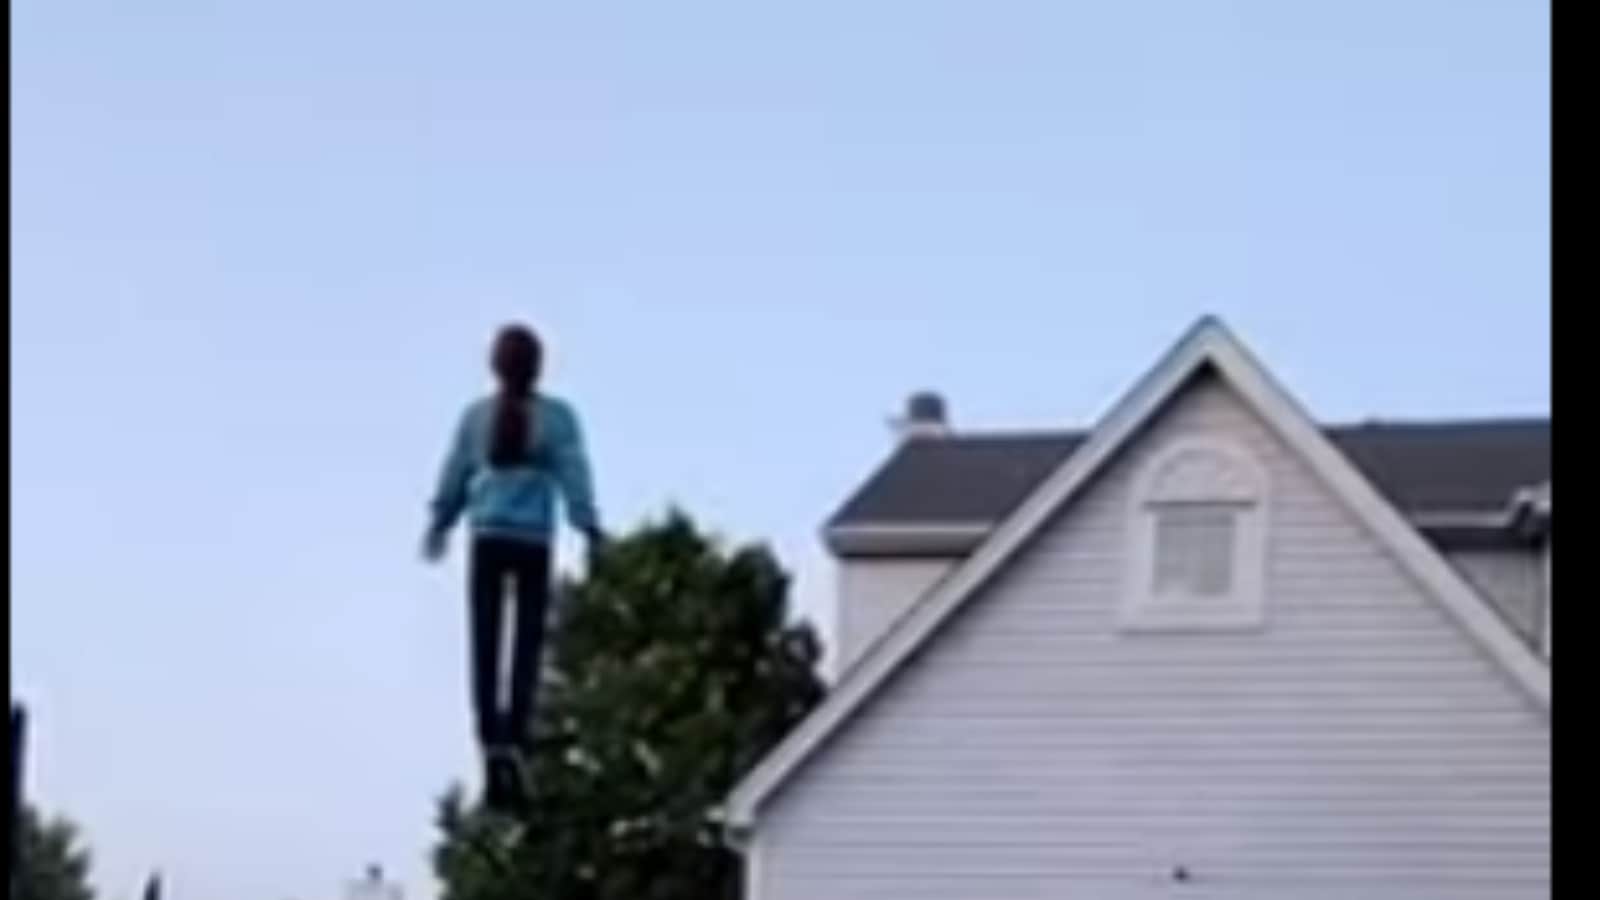 Halloween Has Come Early With This Levitating Stranger Things Decoration Thats Going Viral 8849